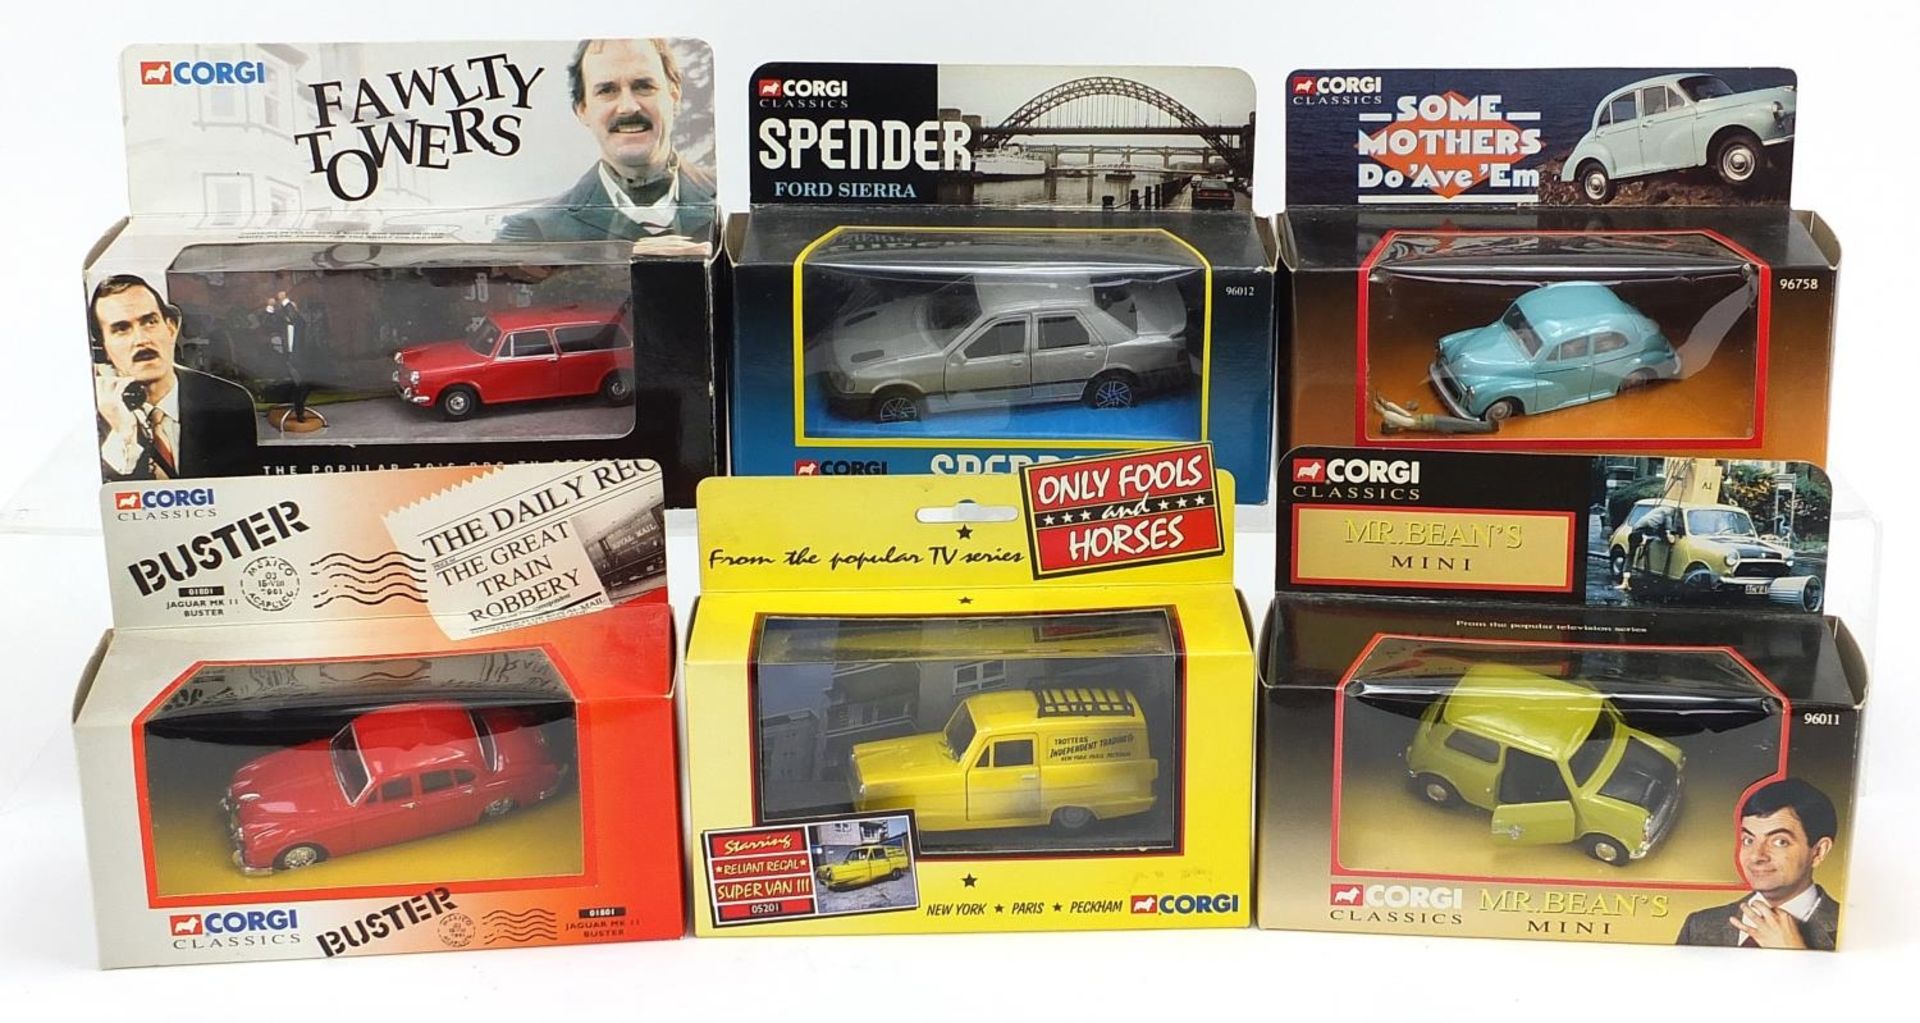 Six Corgi diecast vehicles with boxes including Mr Bean's Mini, Only Fools and Horses, Fawlty Towers